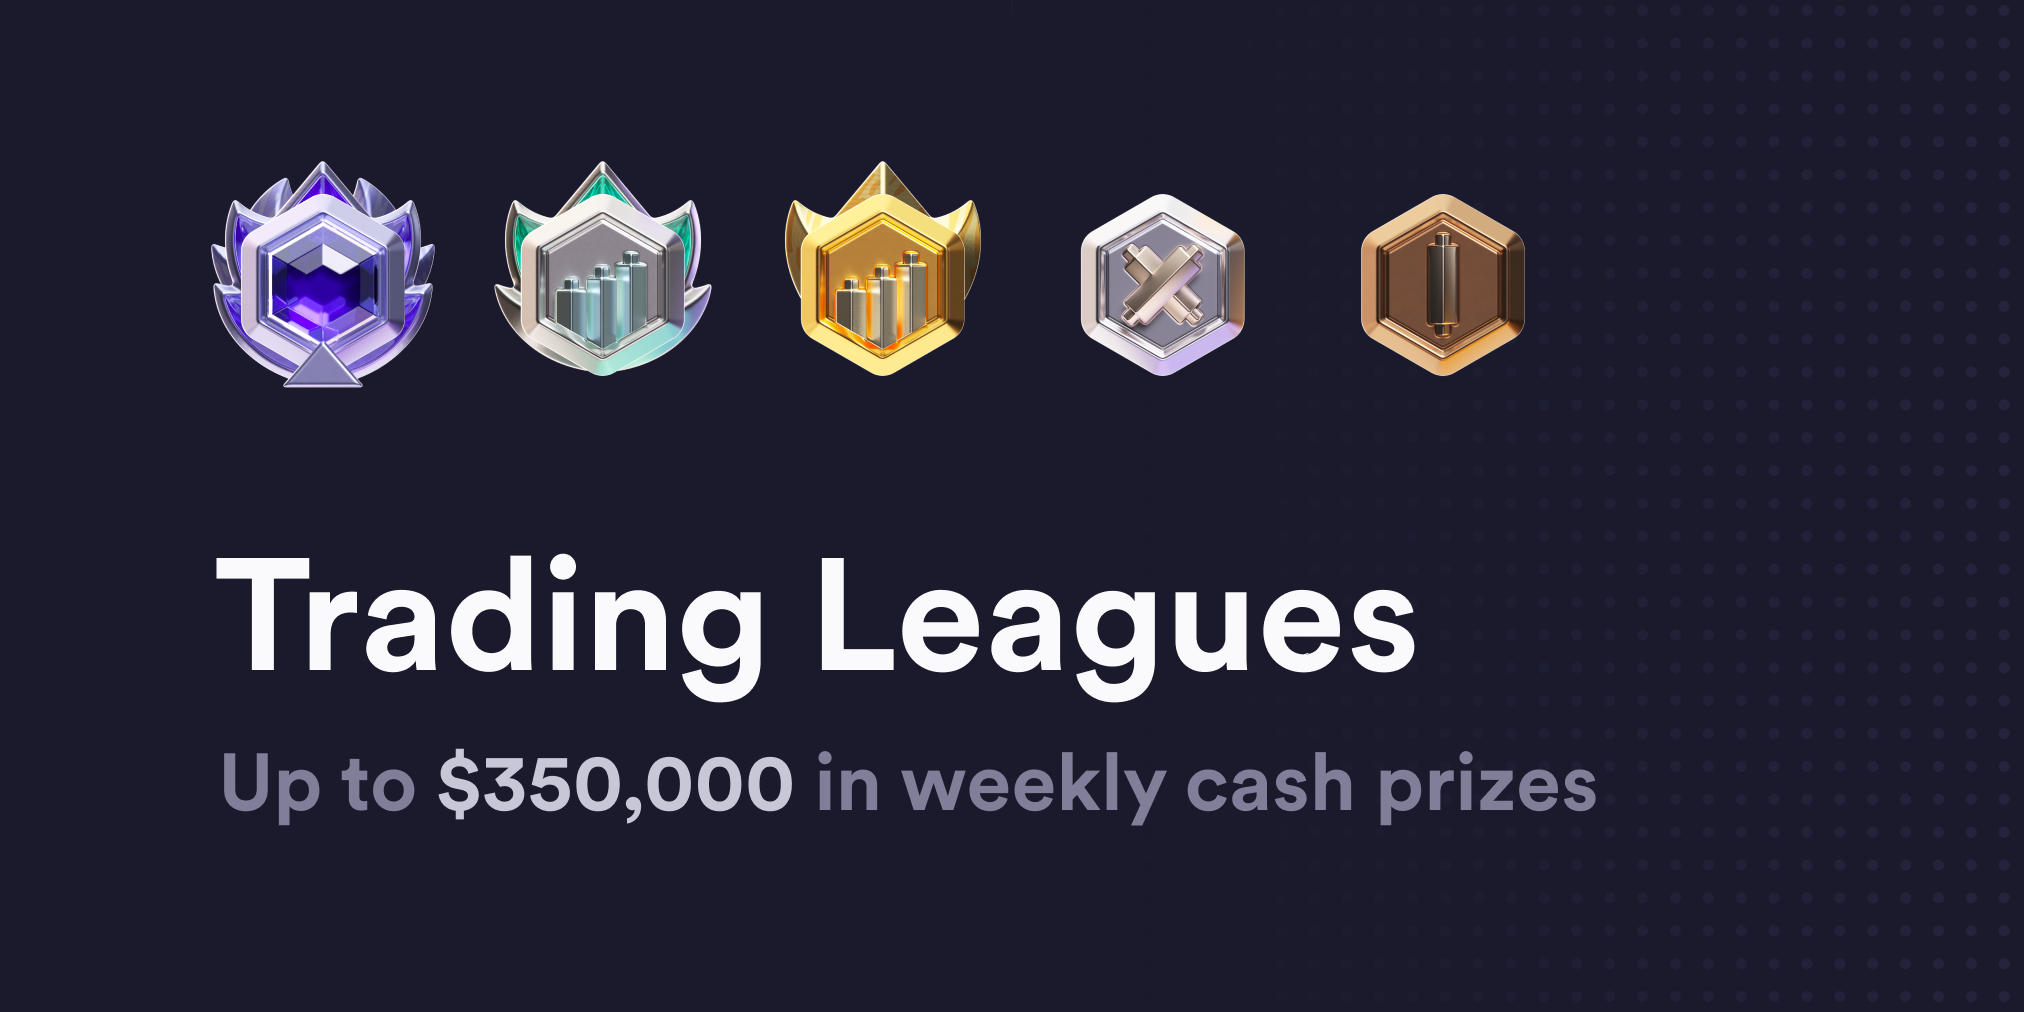 Introducing Trading Leagues